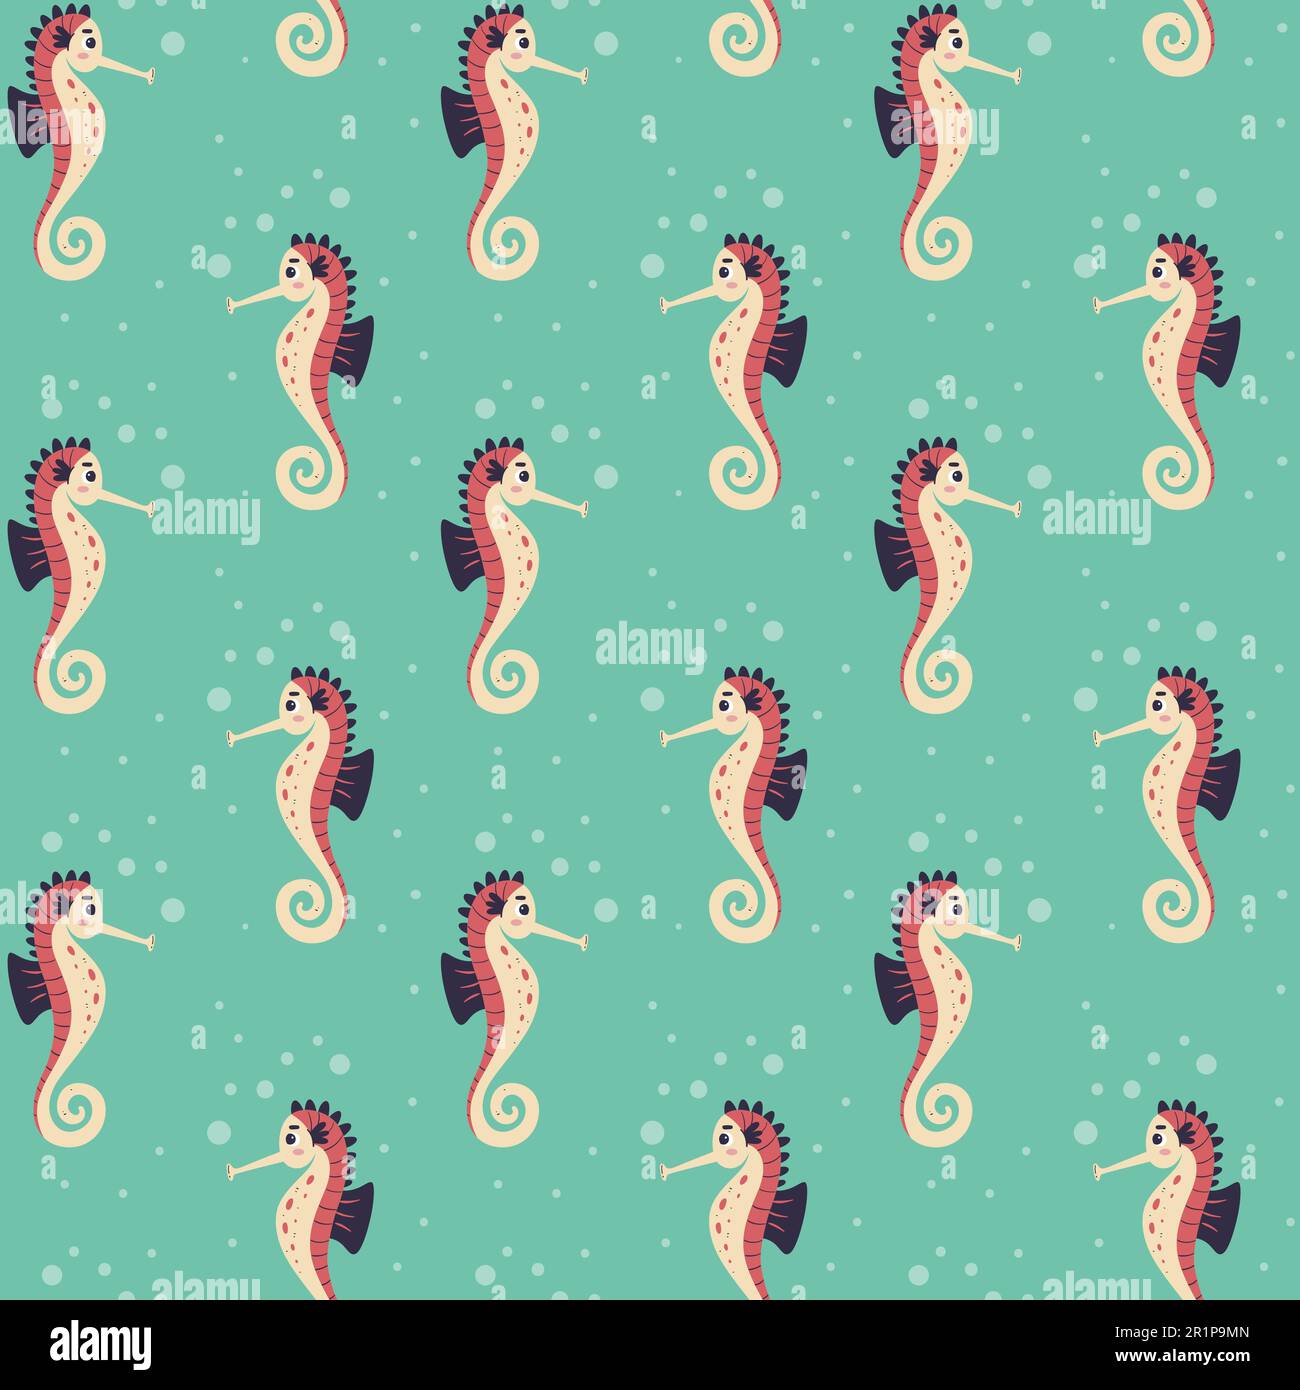 Cute seahorse seamless pattern with decorative bubbles, isolated on turquoise background. Hand-drawn vector illustration. Stock Vector